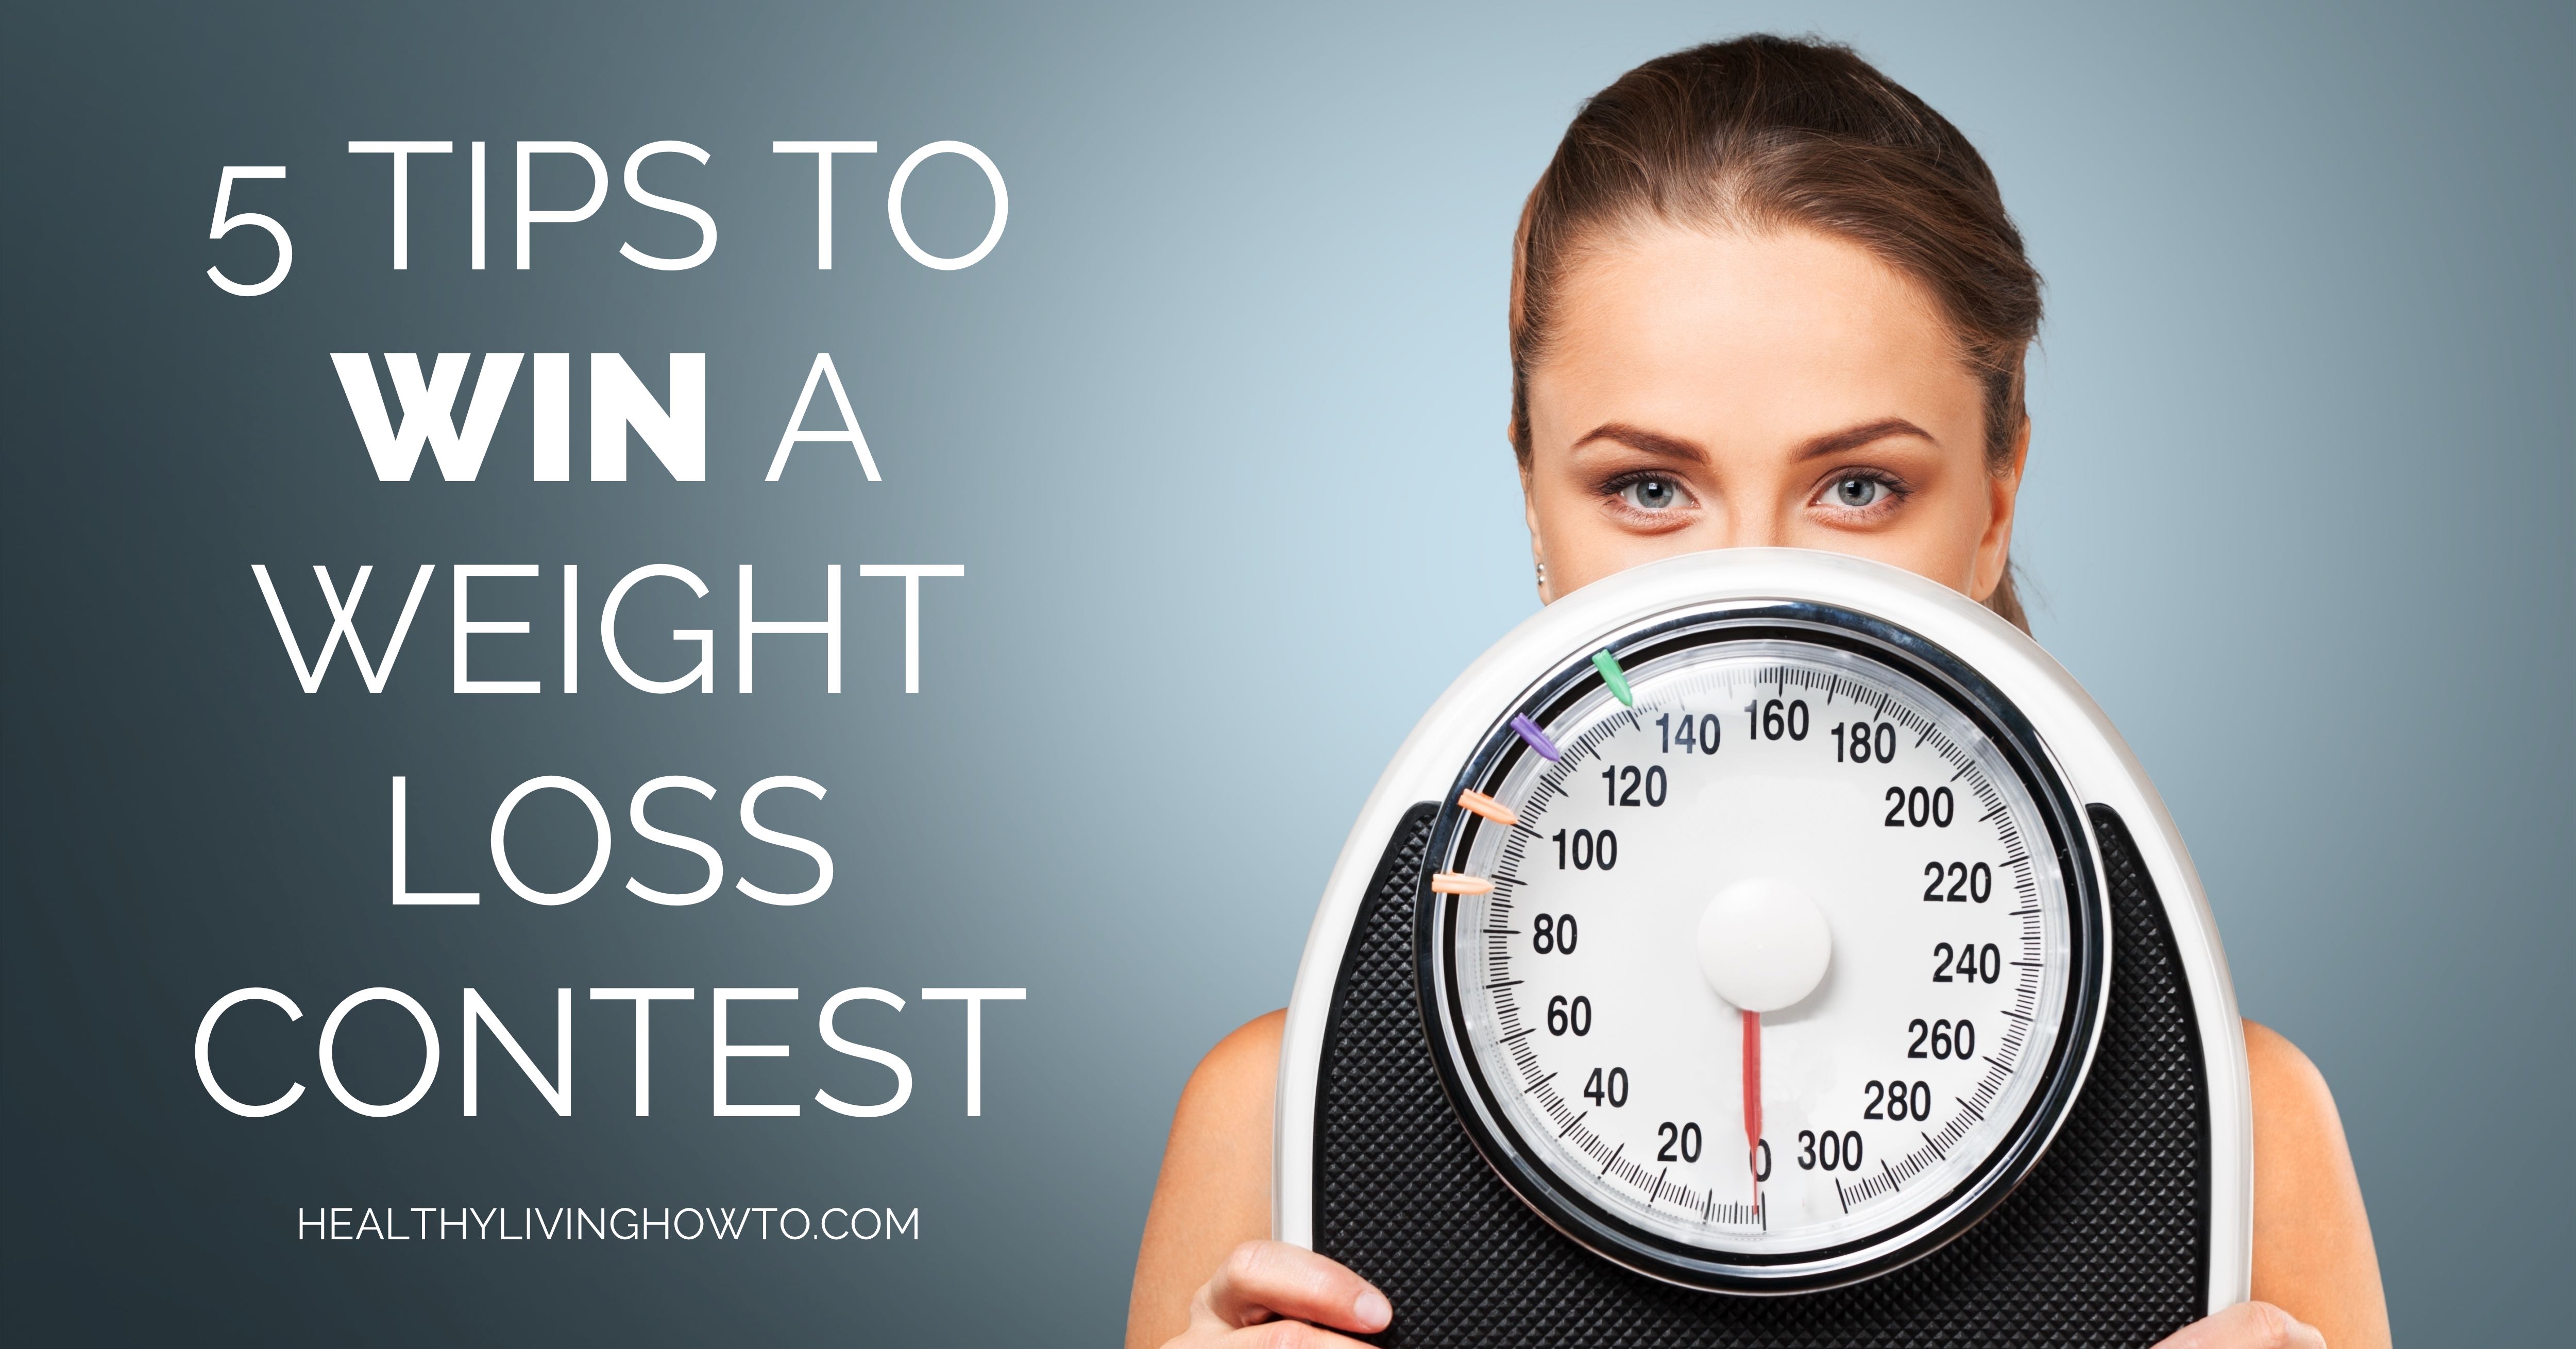 5 Tips to Win a Weight Loss Contest